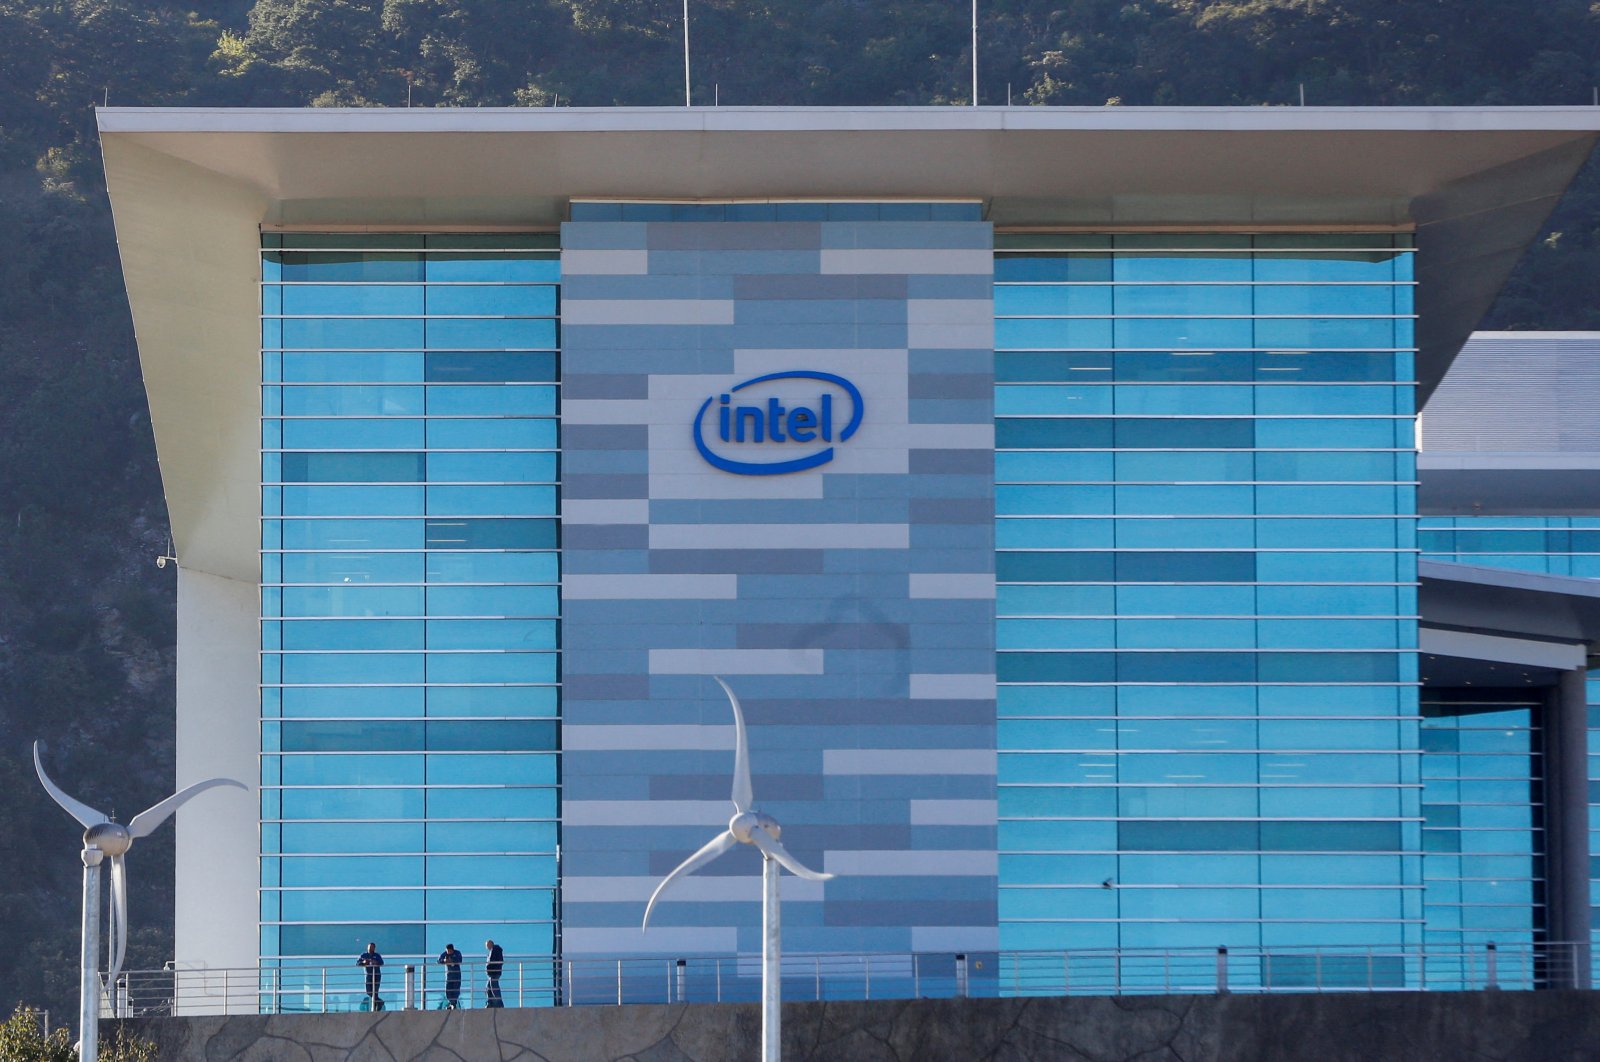 The building of Intel Corp. is pictured in Guadalajara, Mexico, Nov. 30, 2022. (Reuters Photo)